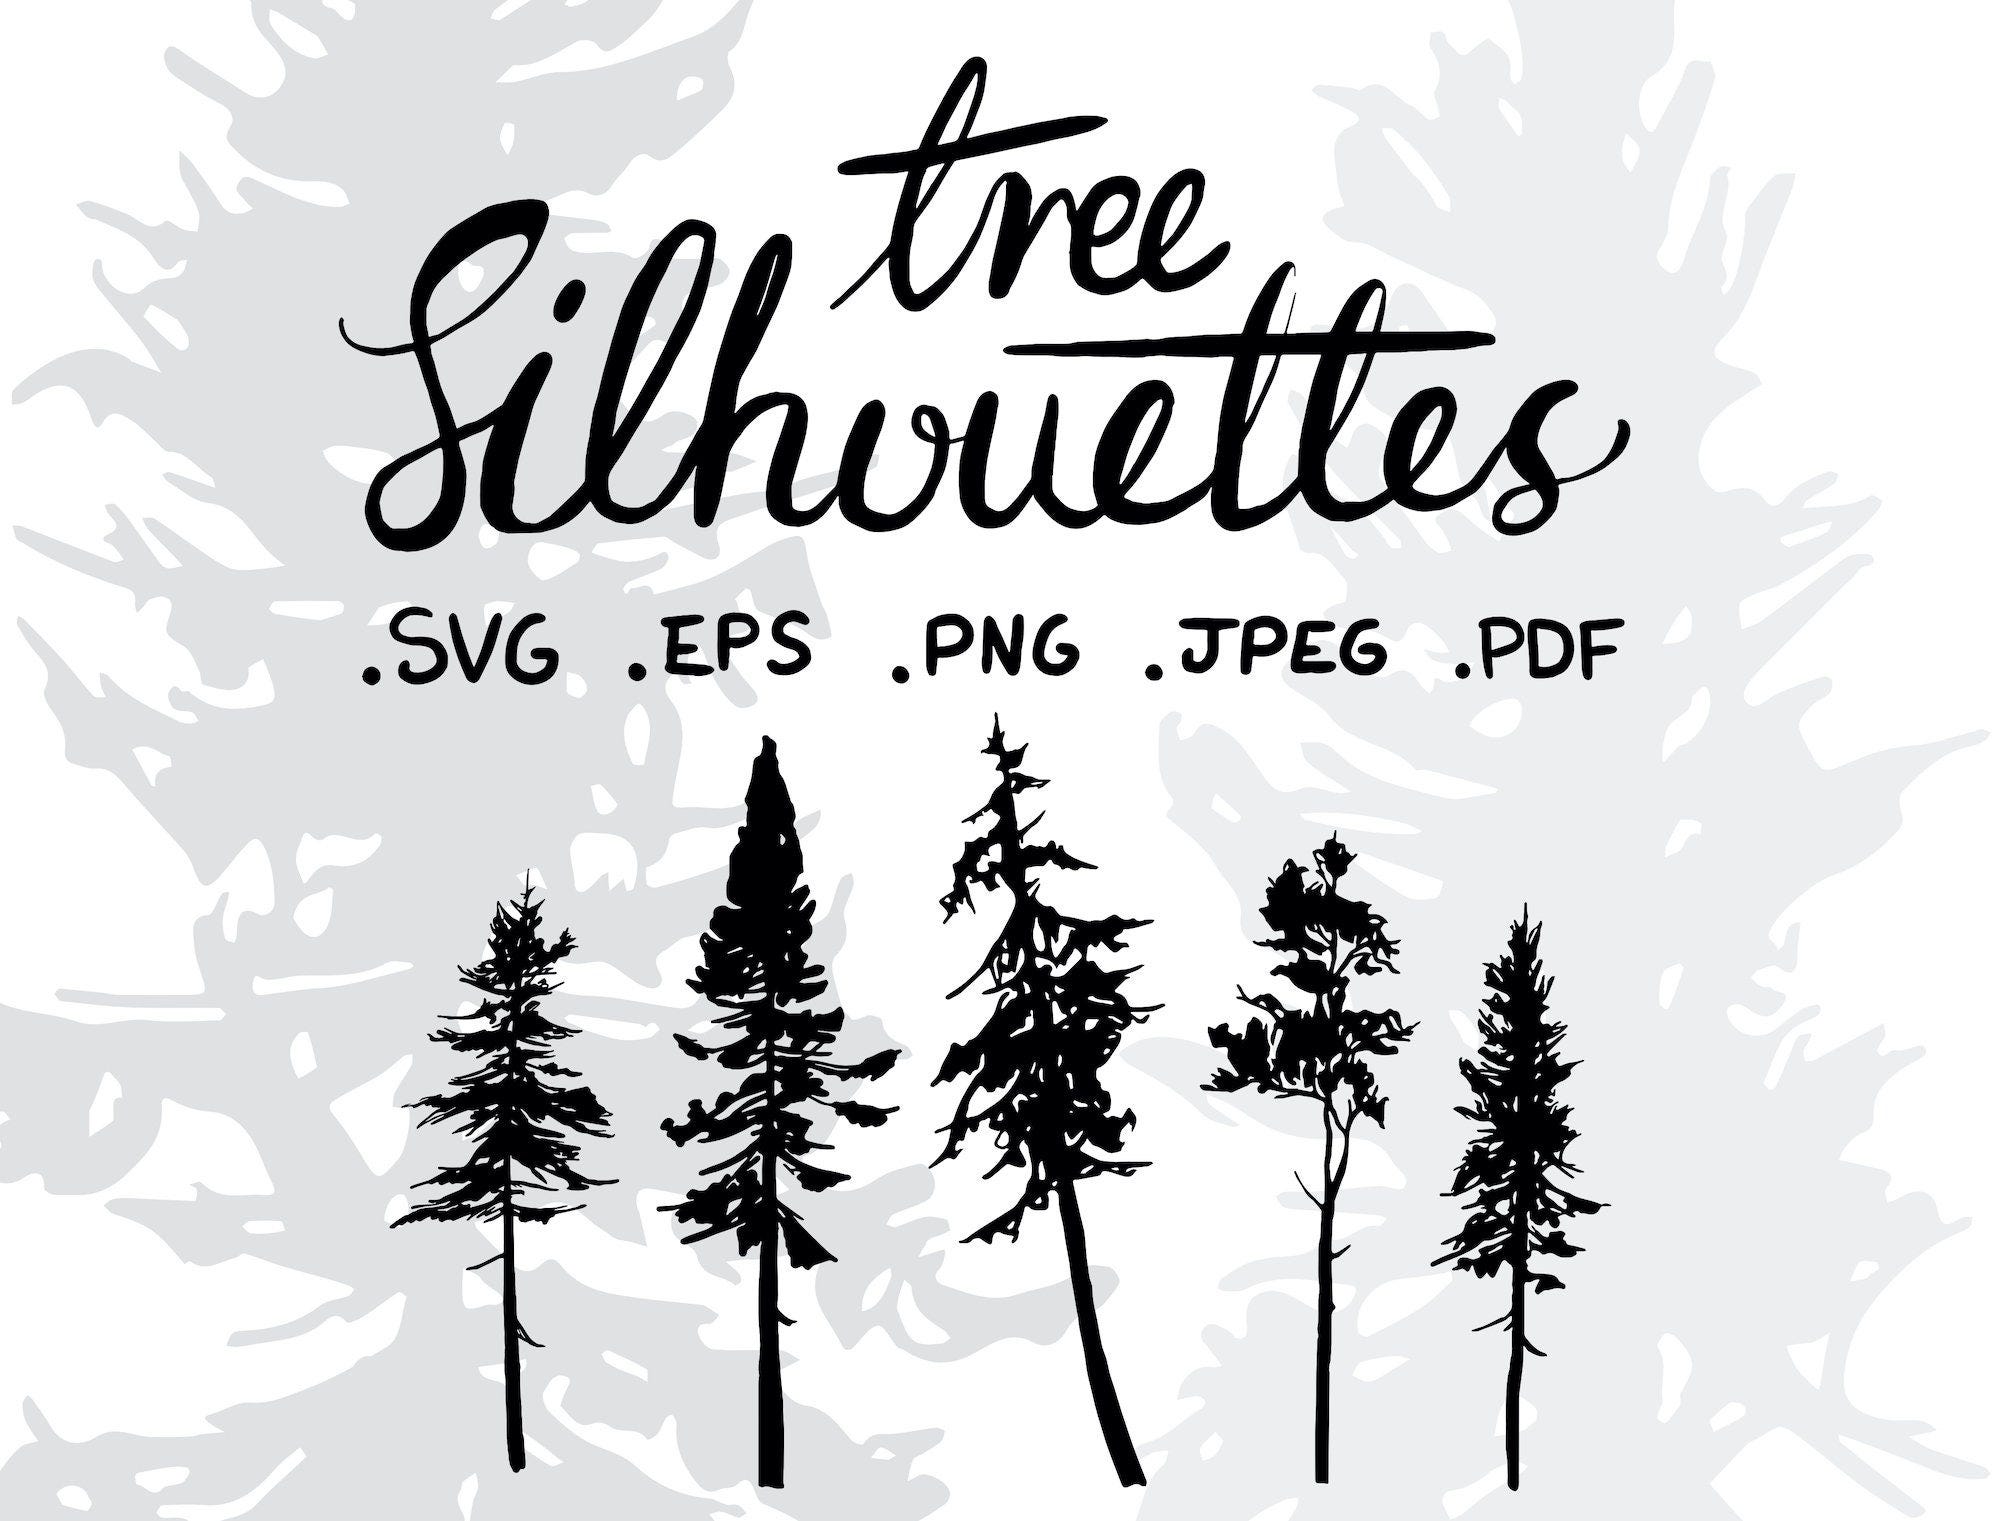 Tree Silhouettes - Png - Instant Download - Lineart - Digital Download - SVG - Pine Trees - Conifer Silhouettes - Christmas tree - Forest